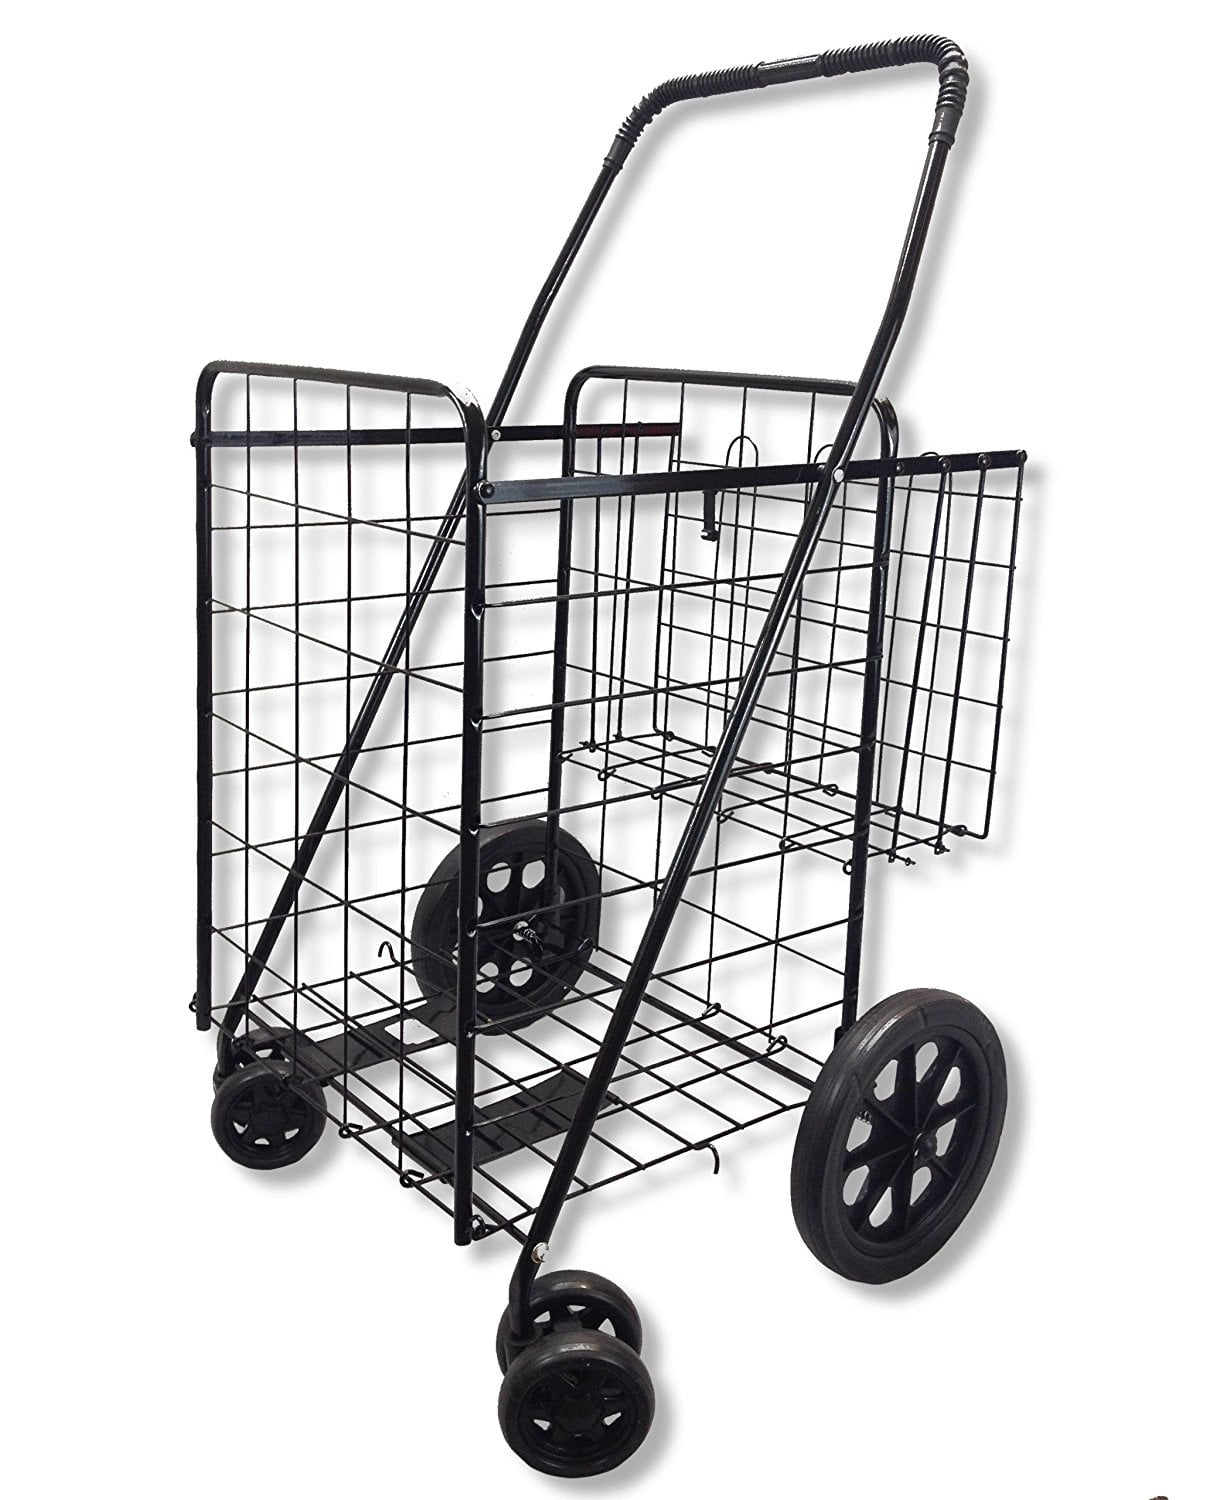 HTDZDX Trolley Old Scooter Folding Shopping cart seat can take Four Rounds to Help Push Small cart 